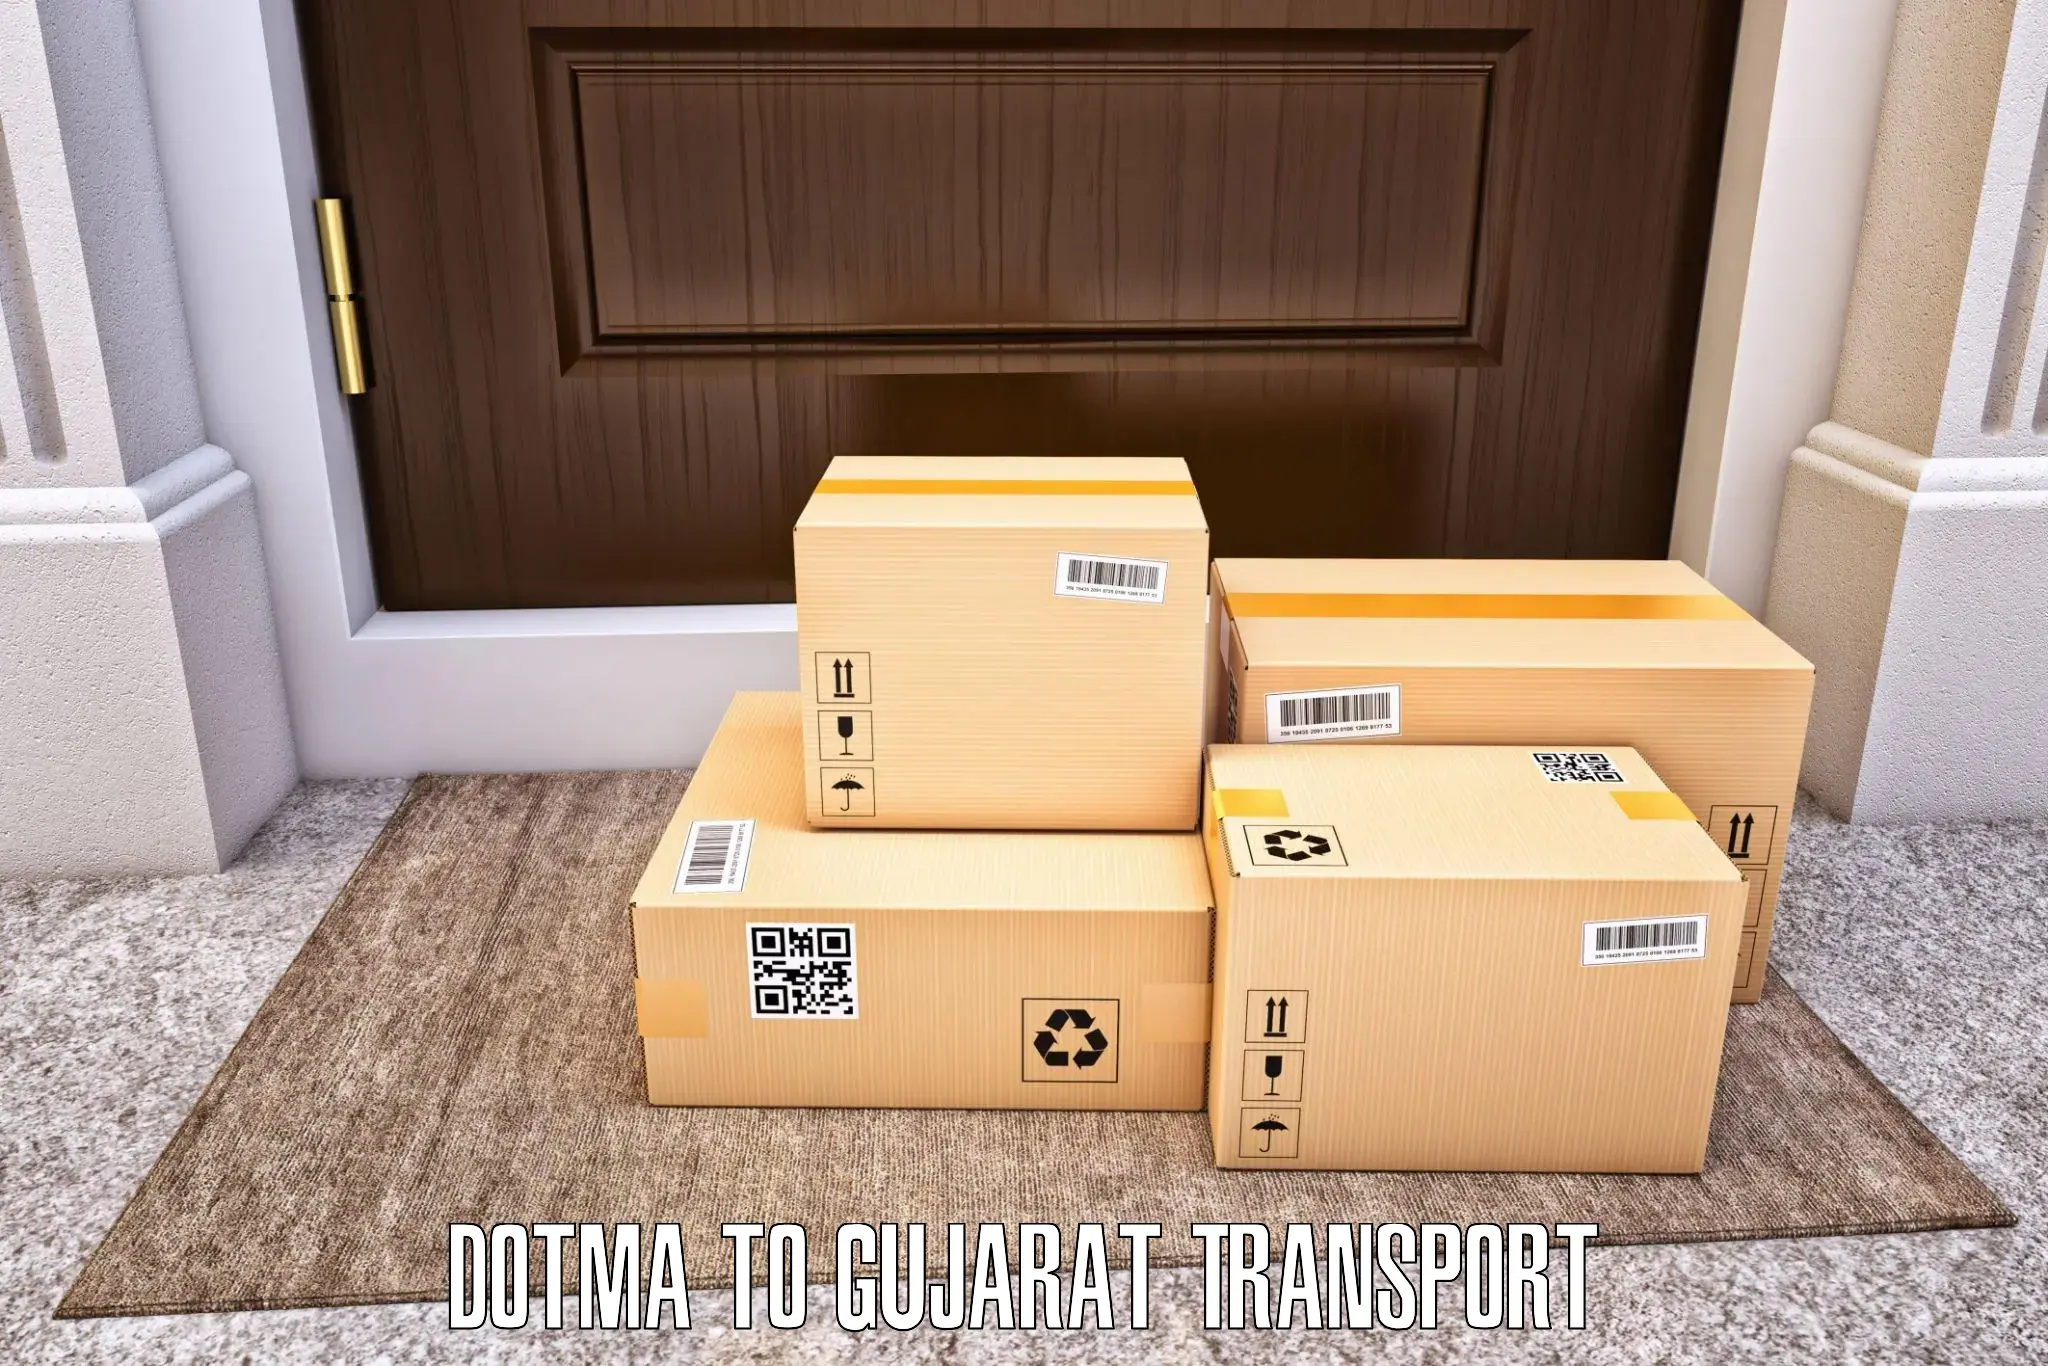 Two wheeler parcel service in Dotma to Lunawada